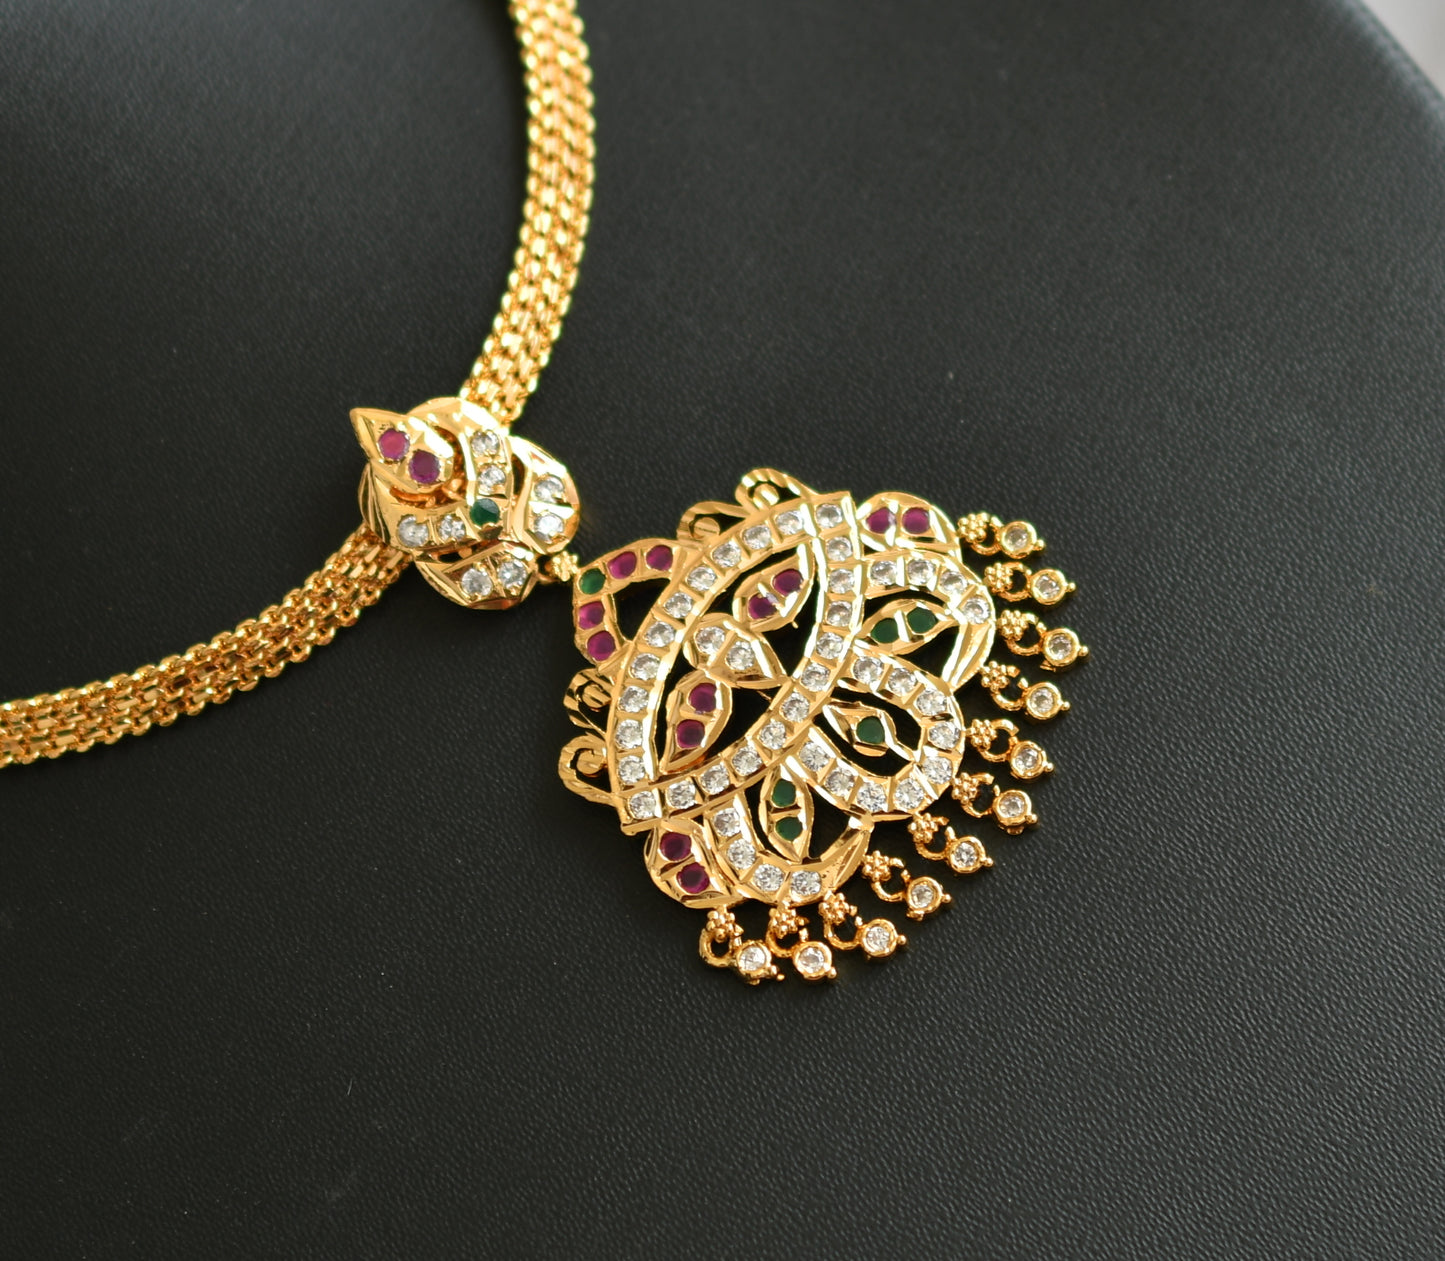 Gold tone ad pink-green-white stone south Indian style attigai/Necklace dj-39442